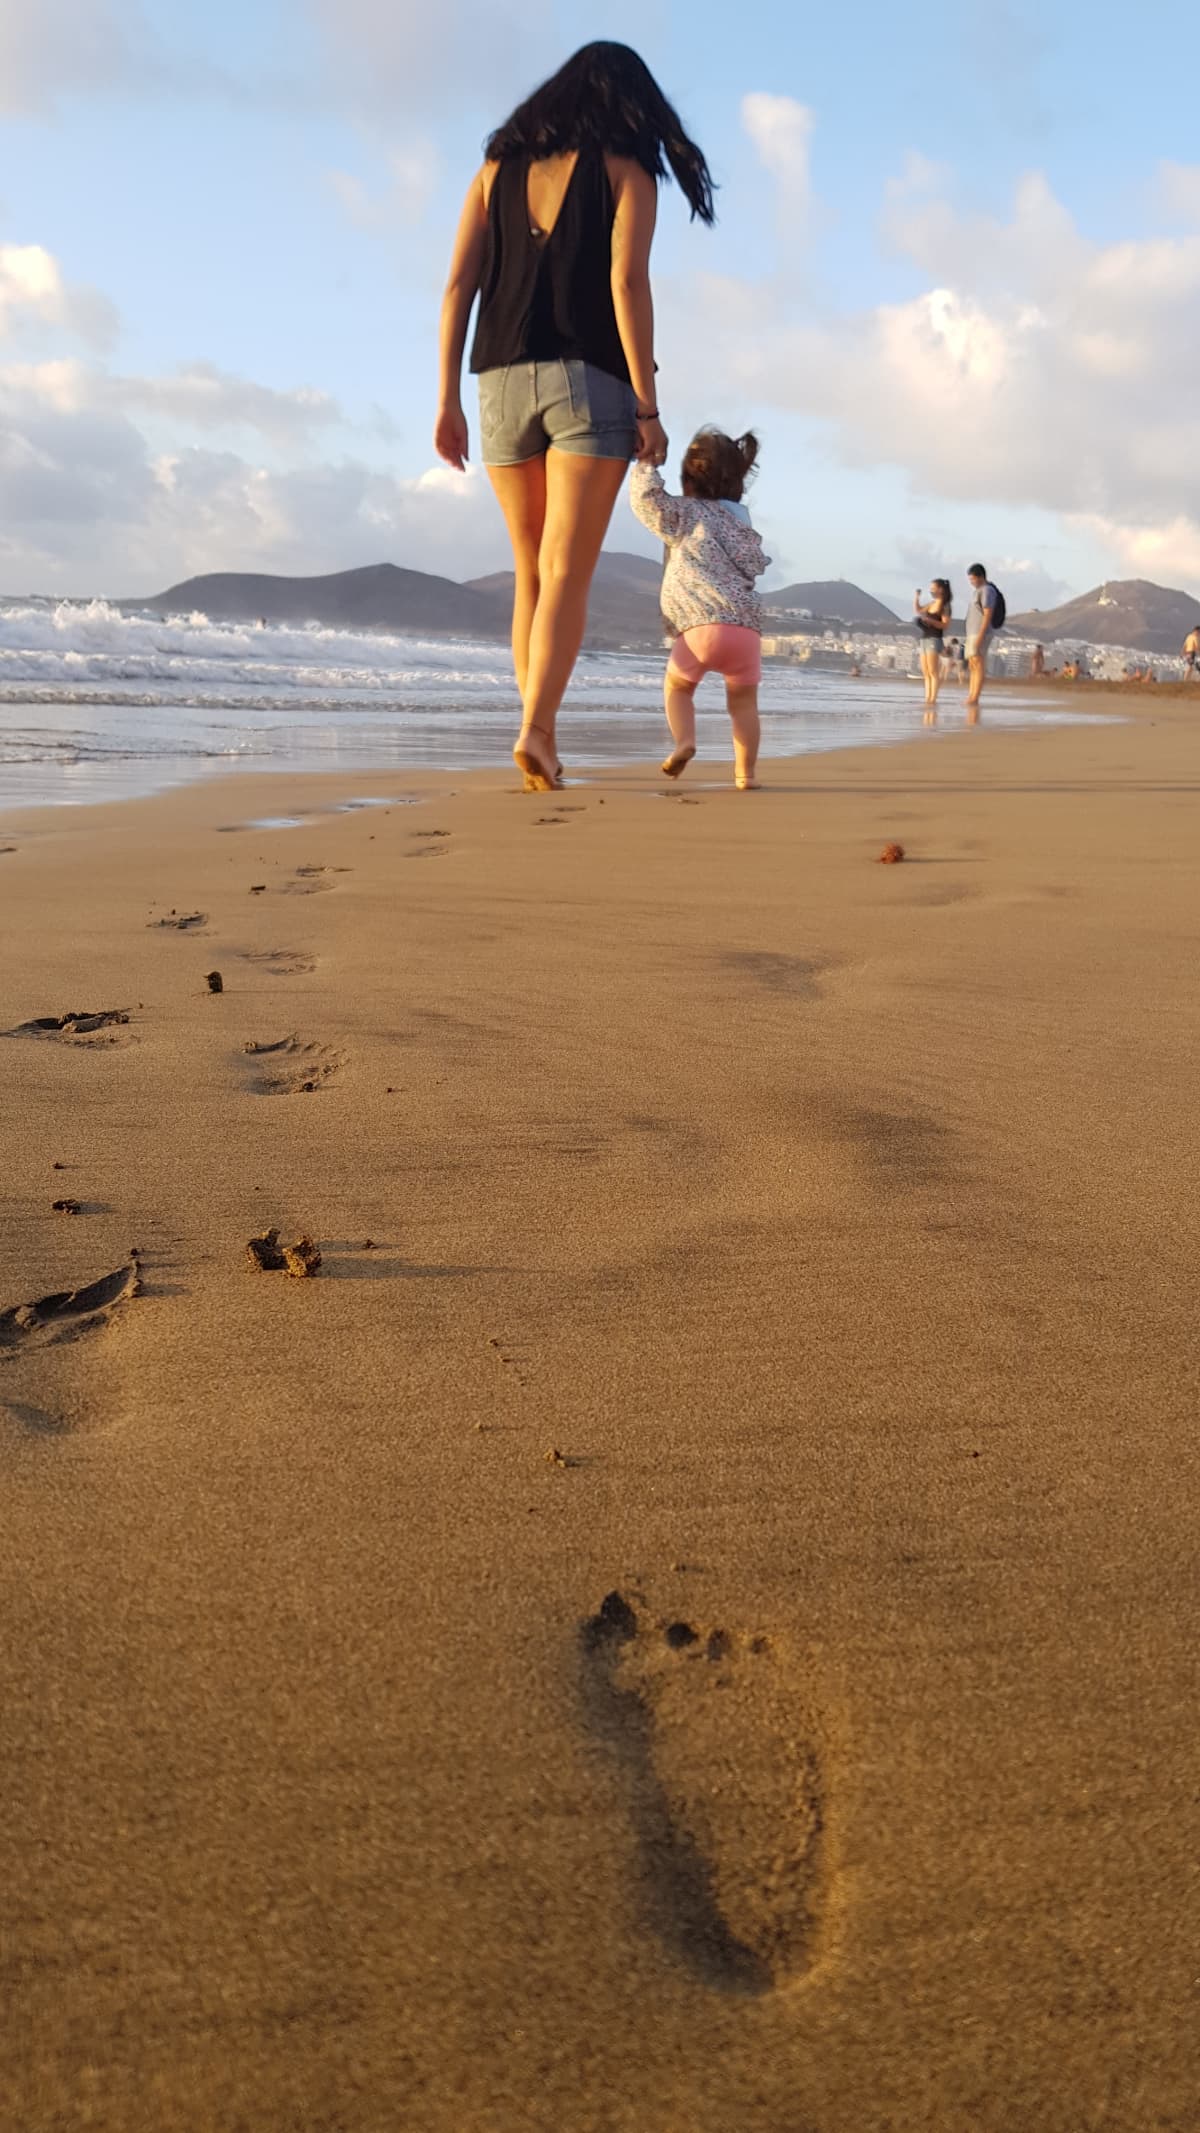 A mother and daughter walking in the sand at the beach